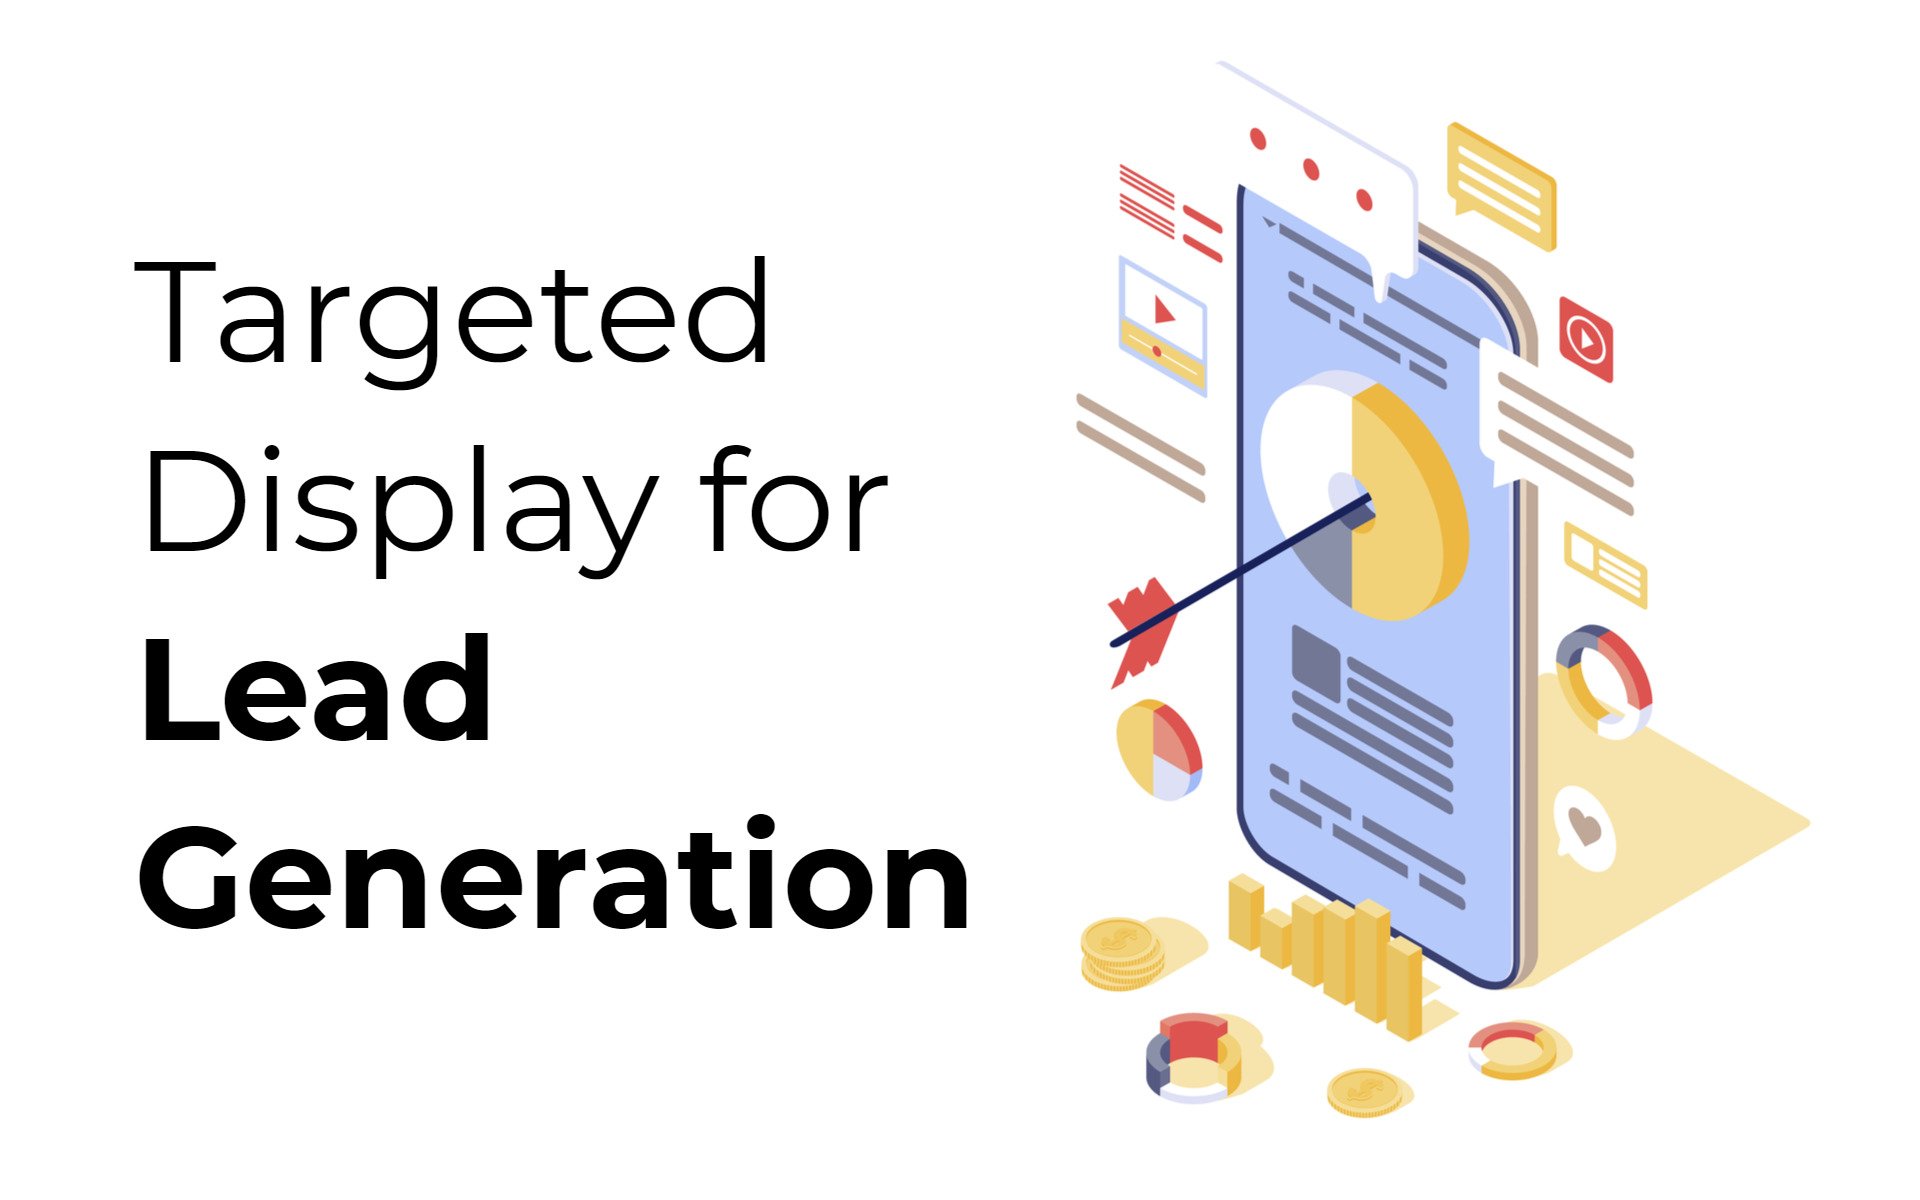 Targeted Display for Lead Generation